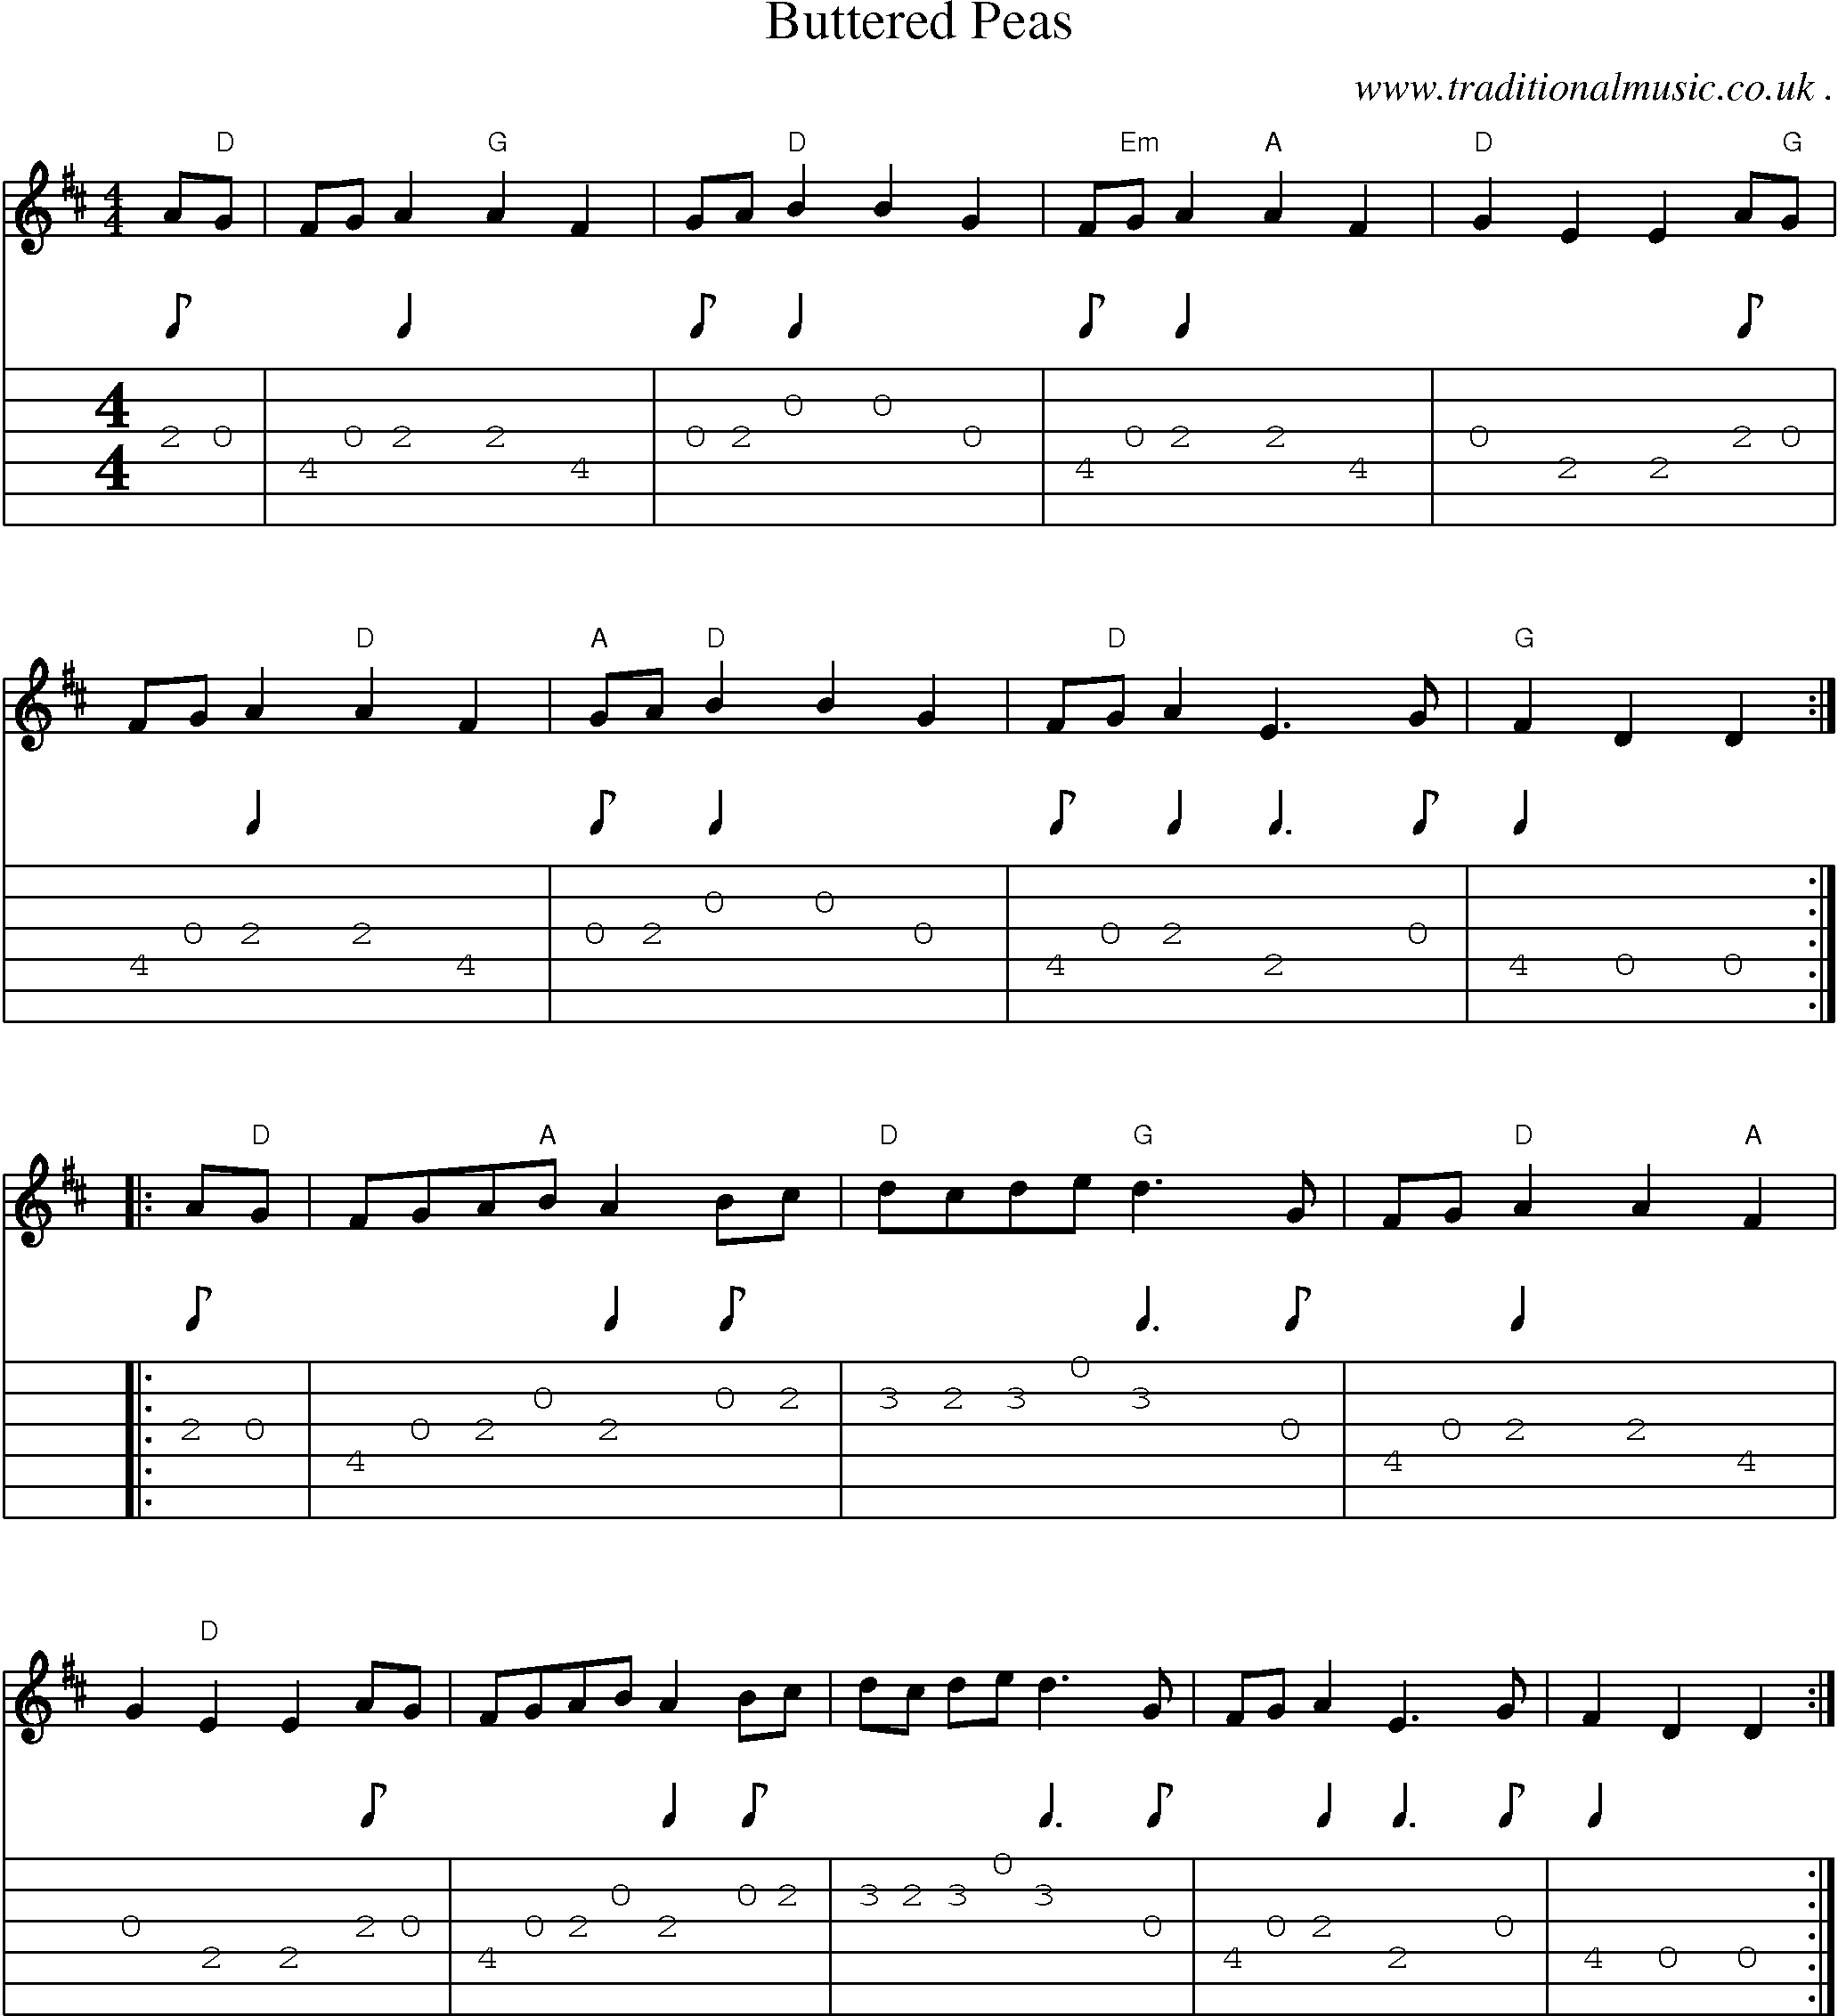 Sheet-Music and Guitar Tabs for Buttered Peas